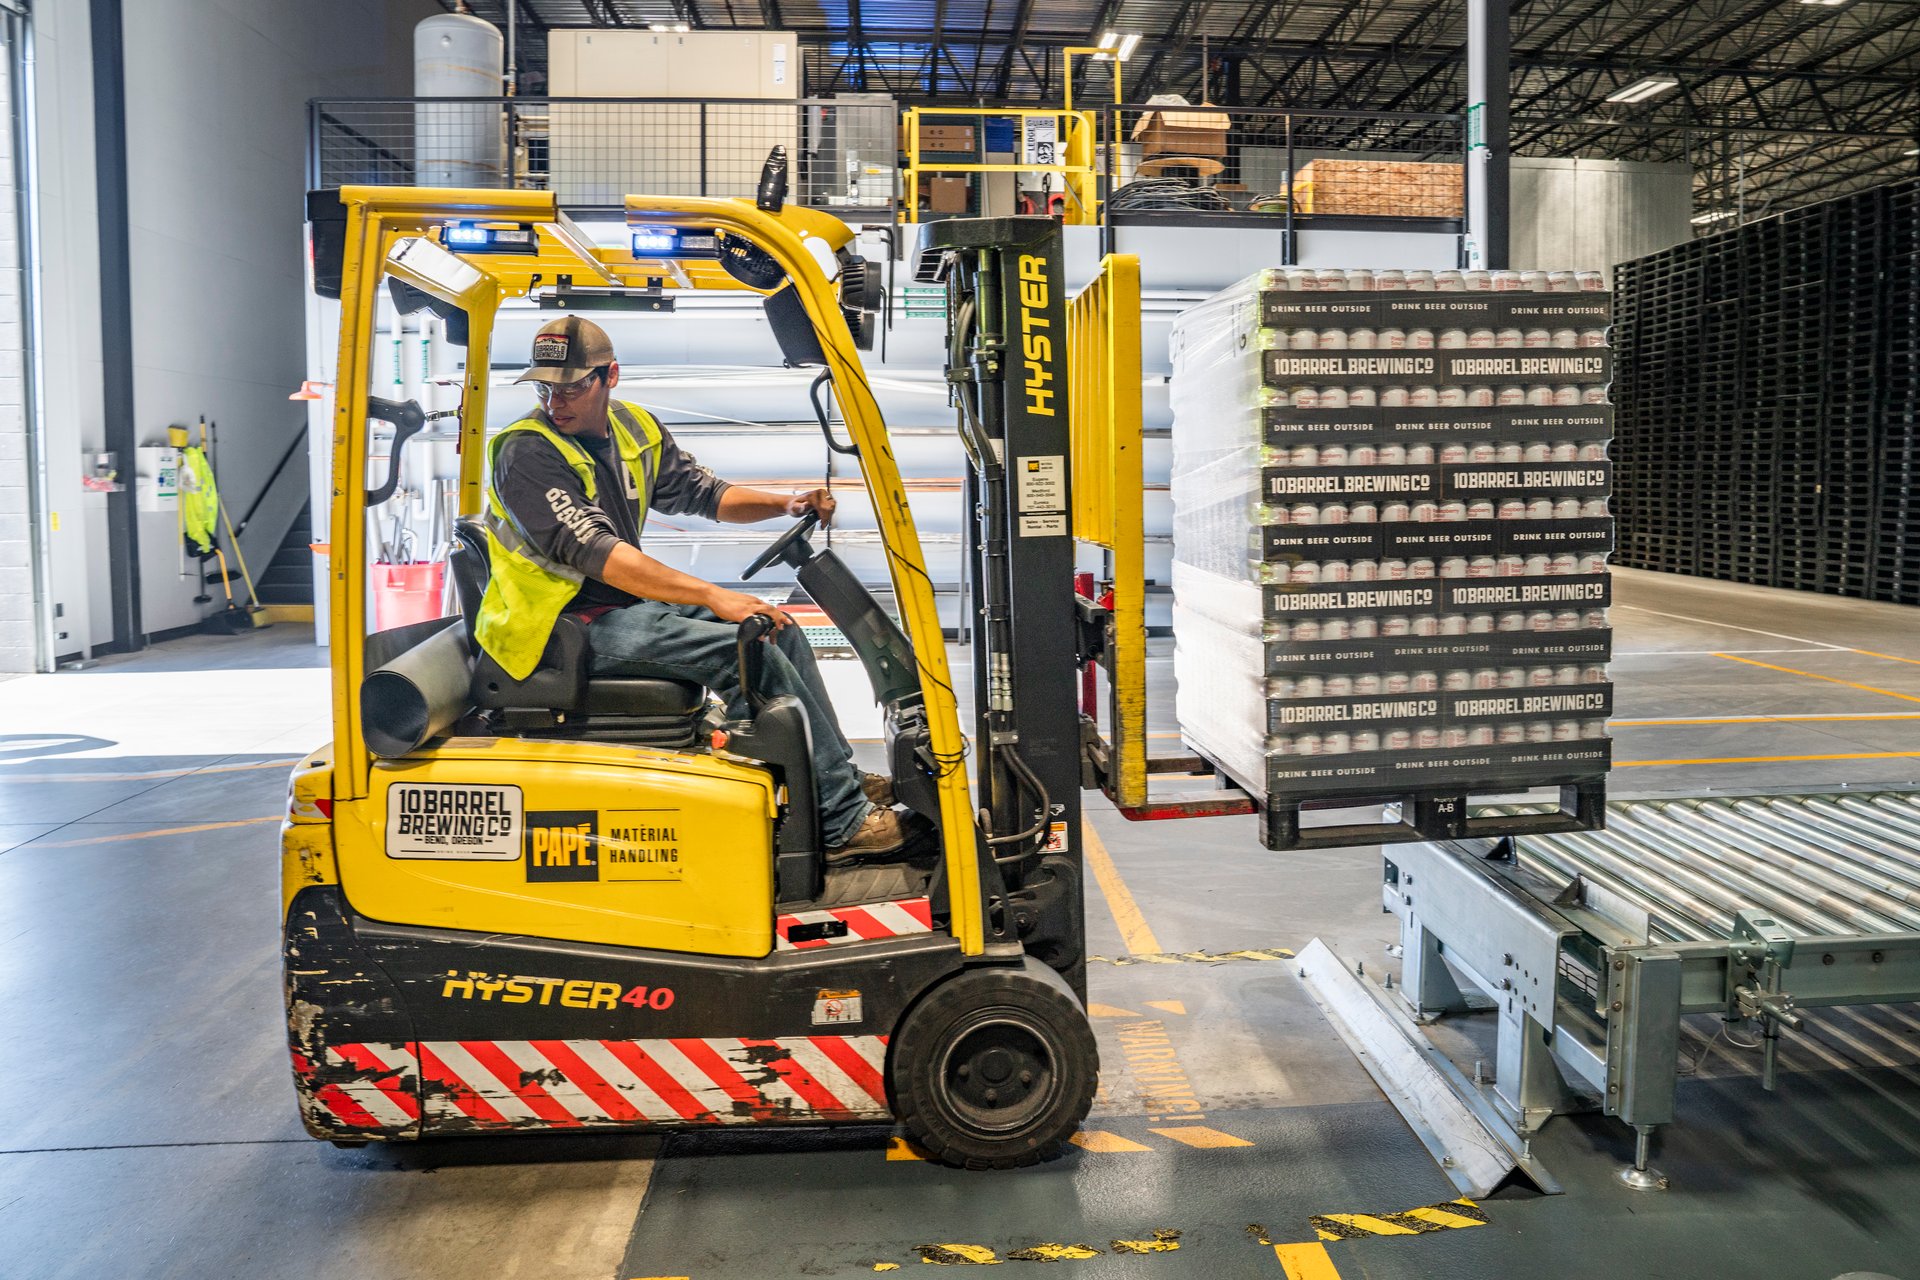 A worker in a high-visibility vest operates a yellow forklift inside a warehouse. The forklift is lifting a pallet stacked with boxes. The facility has a high ceiling, and industrial equipment and shelving can be seen in the background.